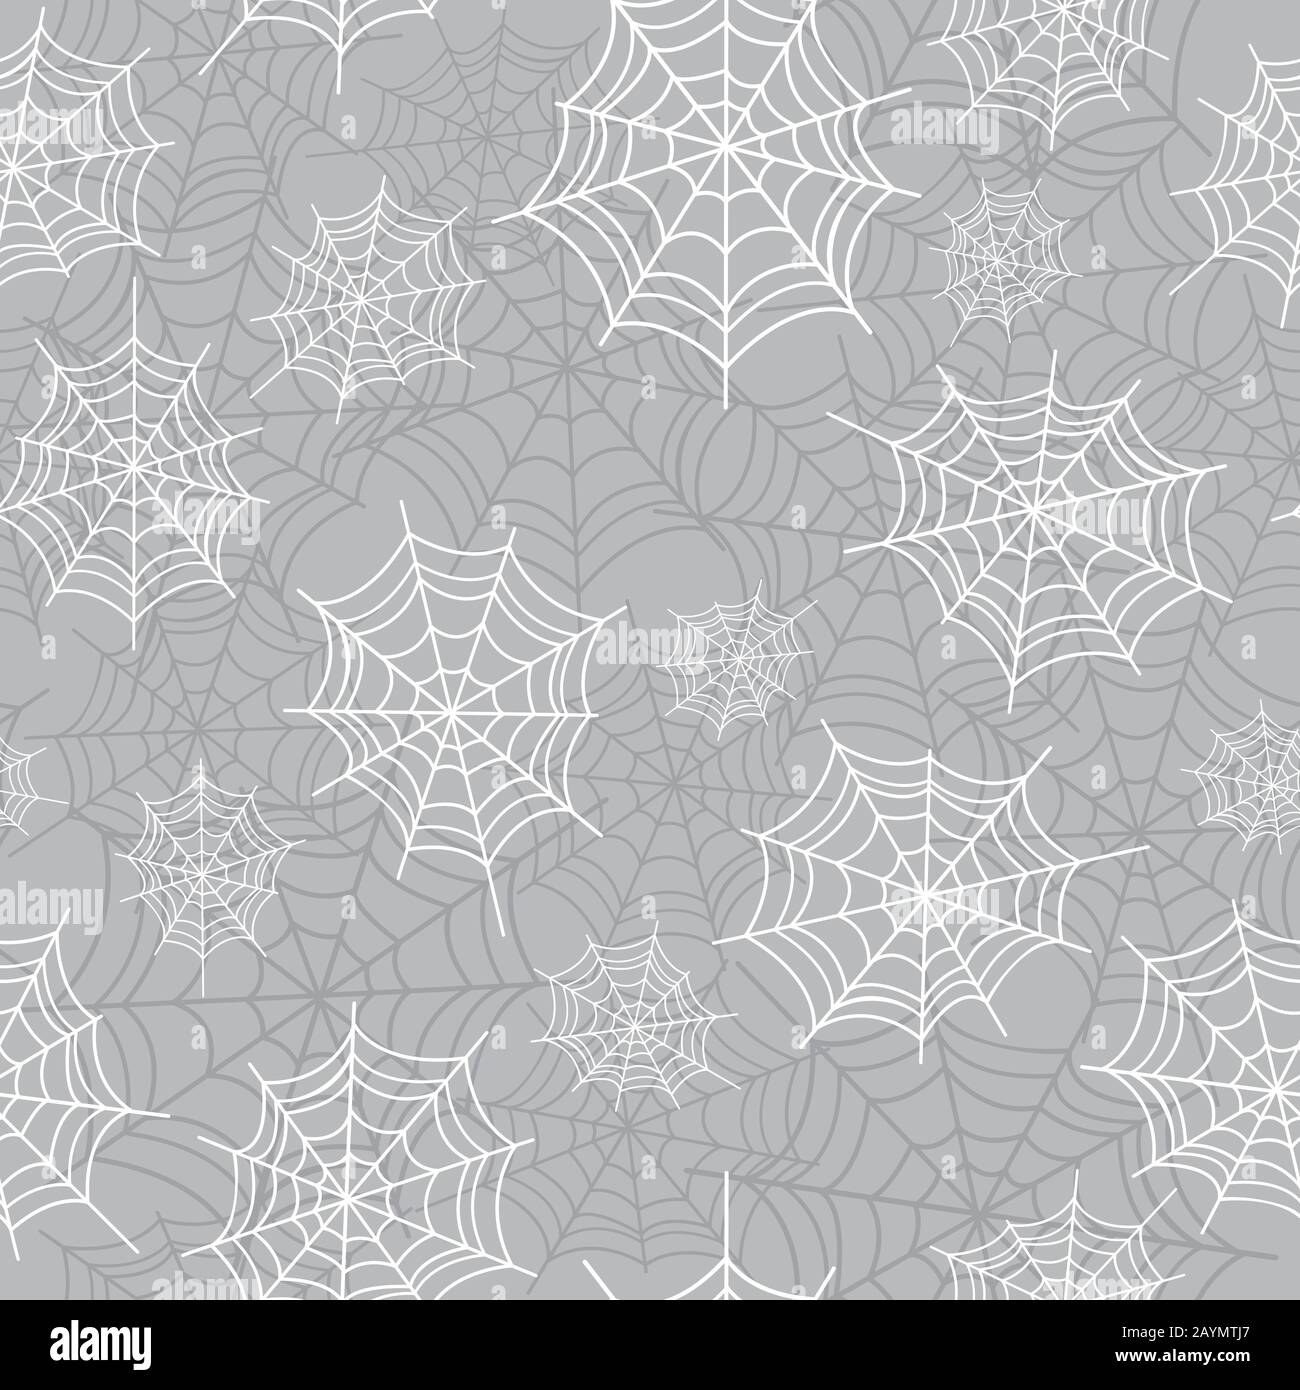 Cobweb, spiderweb halloween seamless pattern. Creepy background repeat pattern for october holidays. Vector illustration. Stock Vector